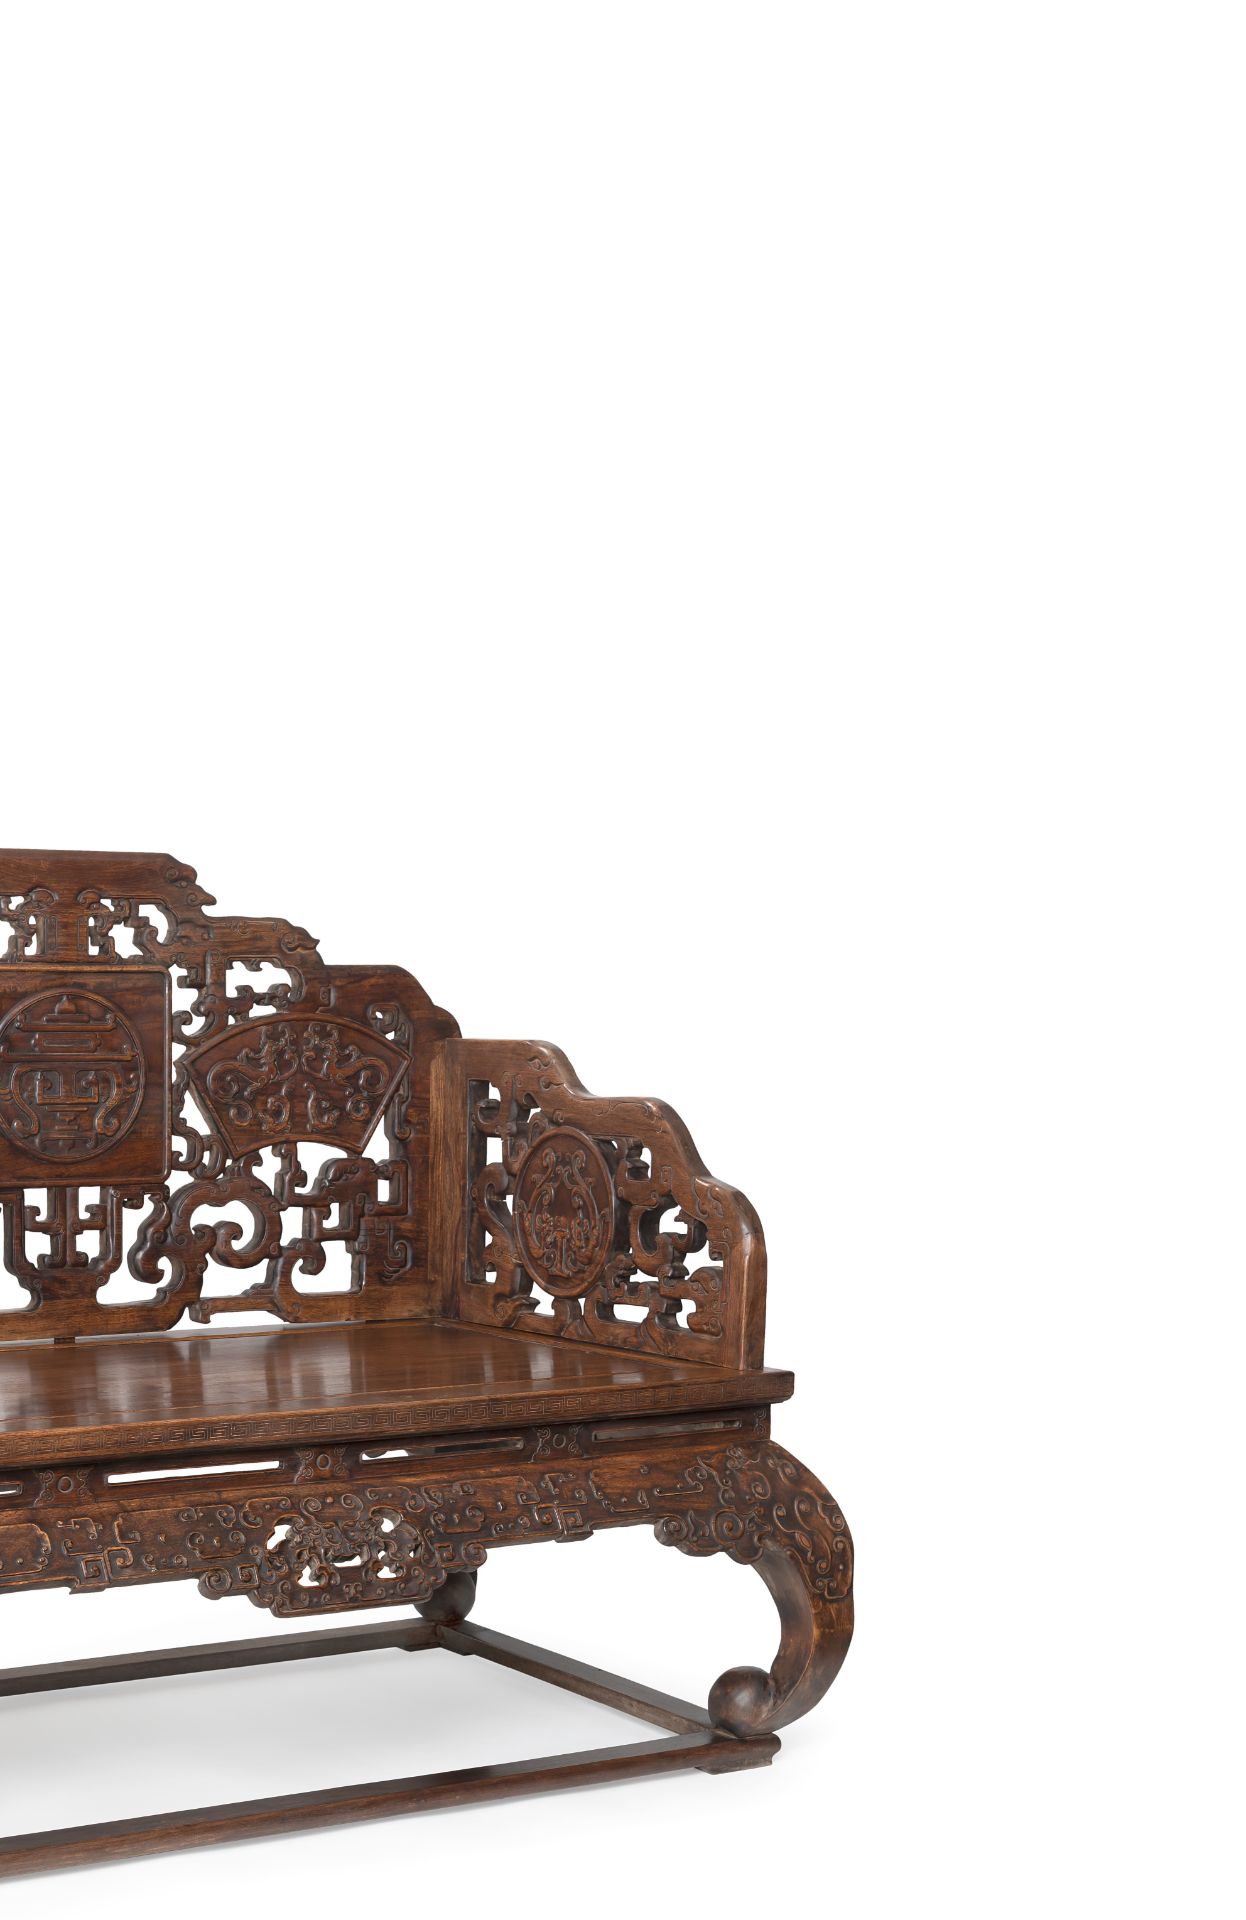 A FINELY CARVED HARDWOOD THRONE